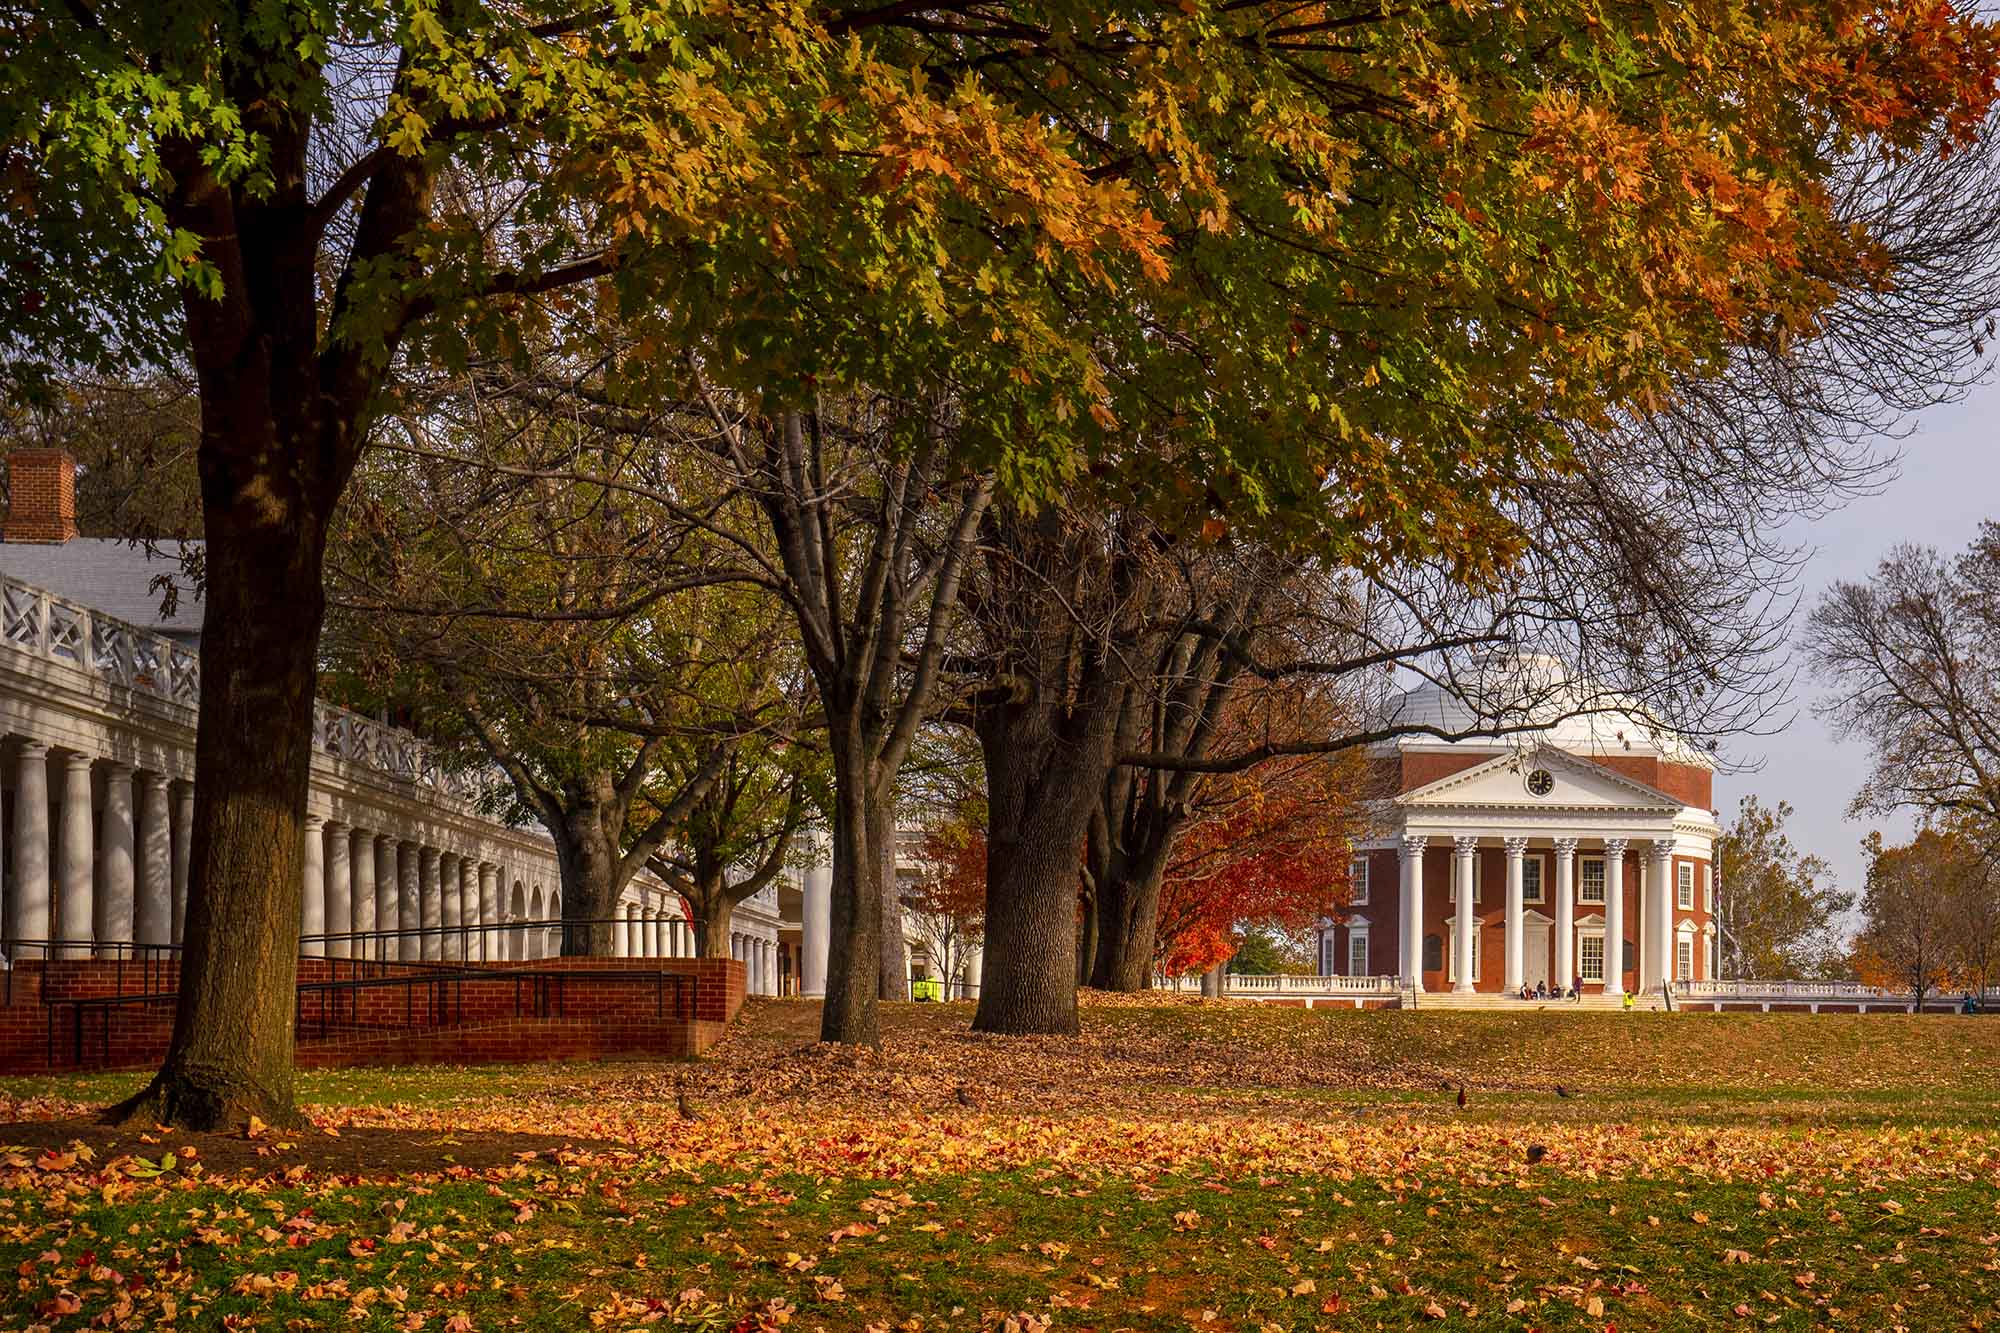 View of the Rotunda from the lawn as the trees are changing color